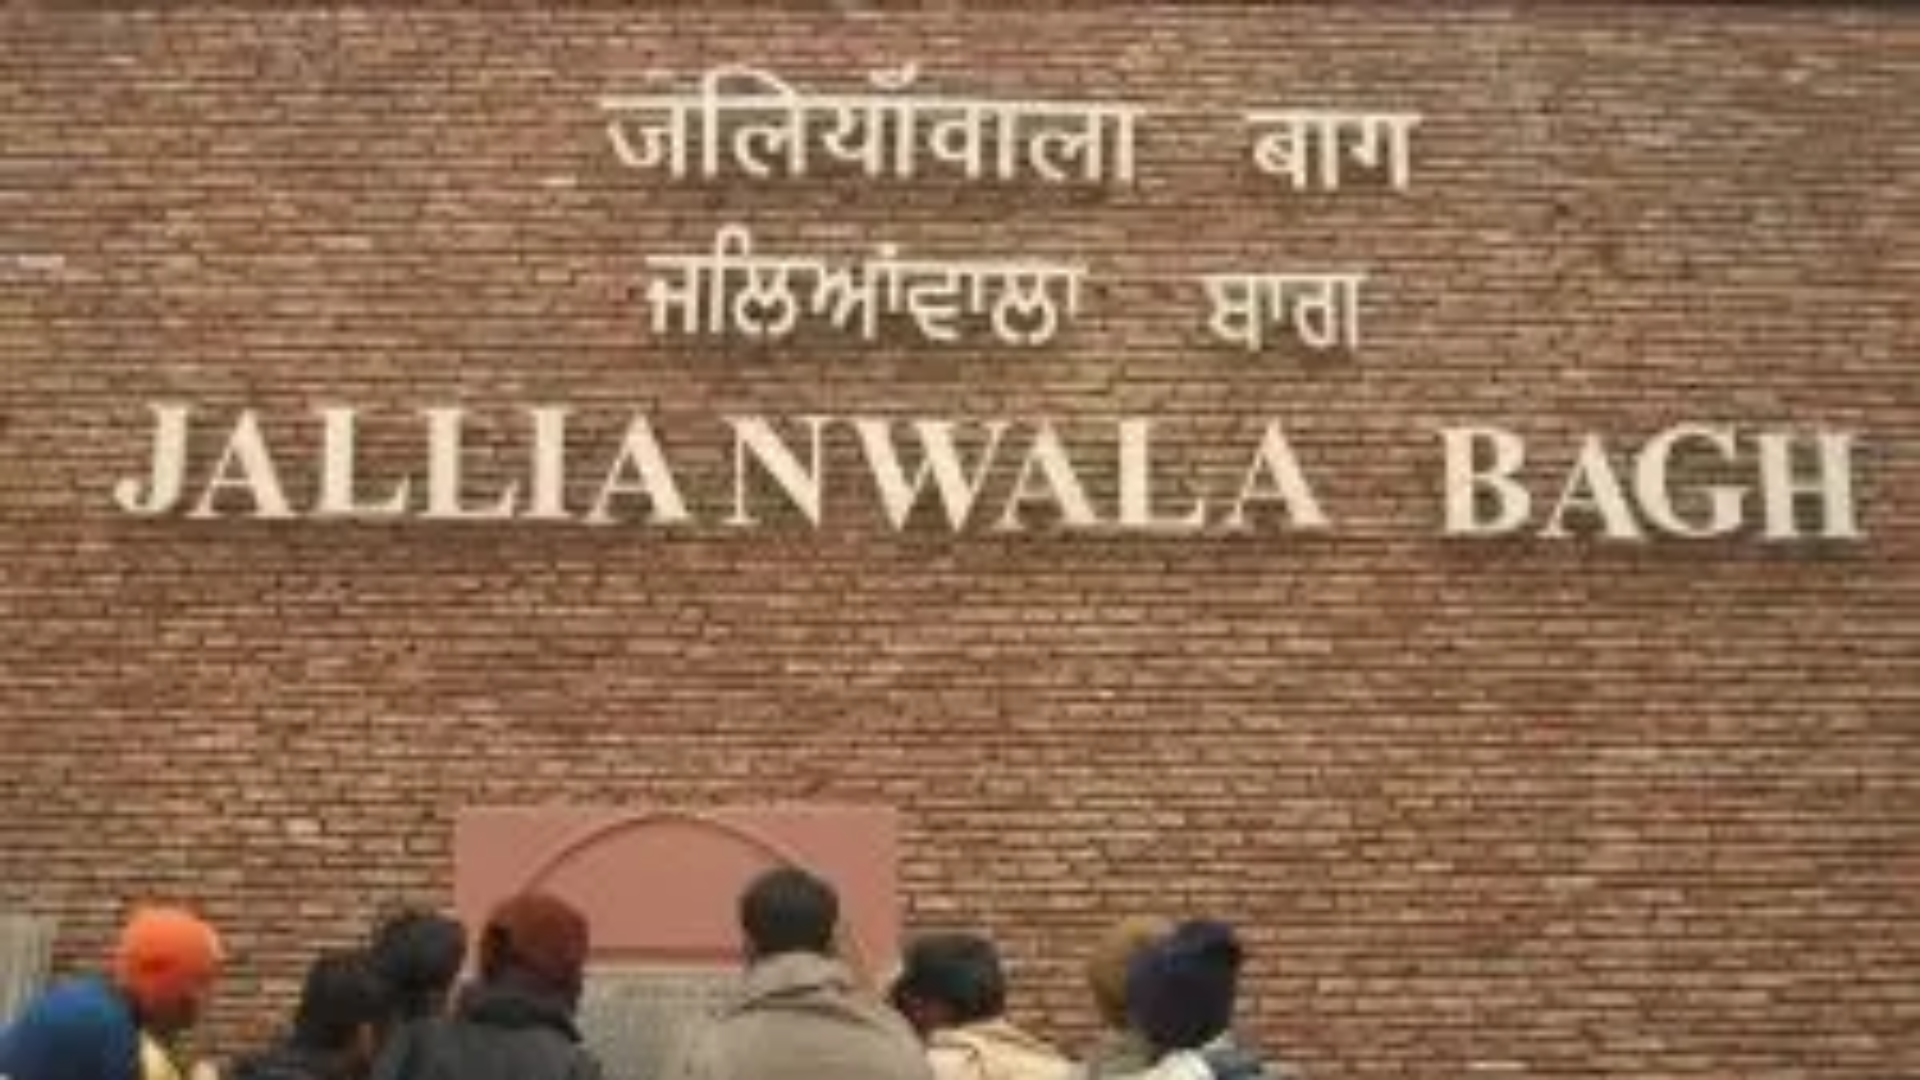 Leaders Pay Homage to Jallianwala Bagh Massacre Victims on 103rd Anniversary